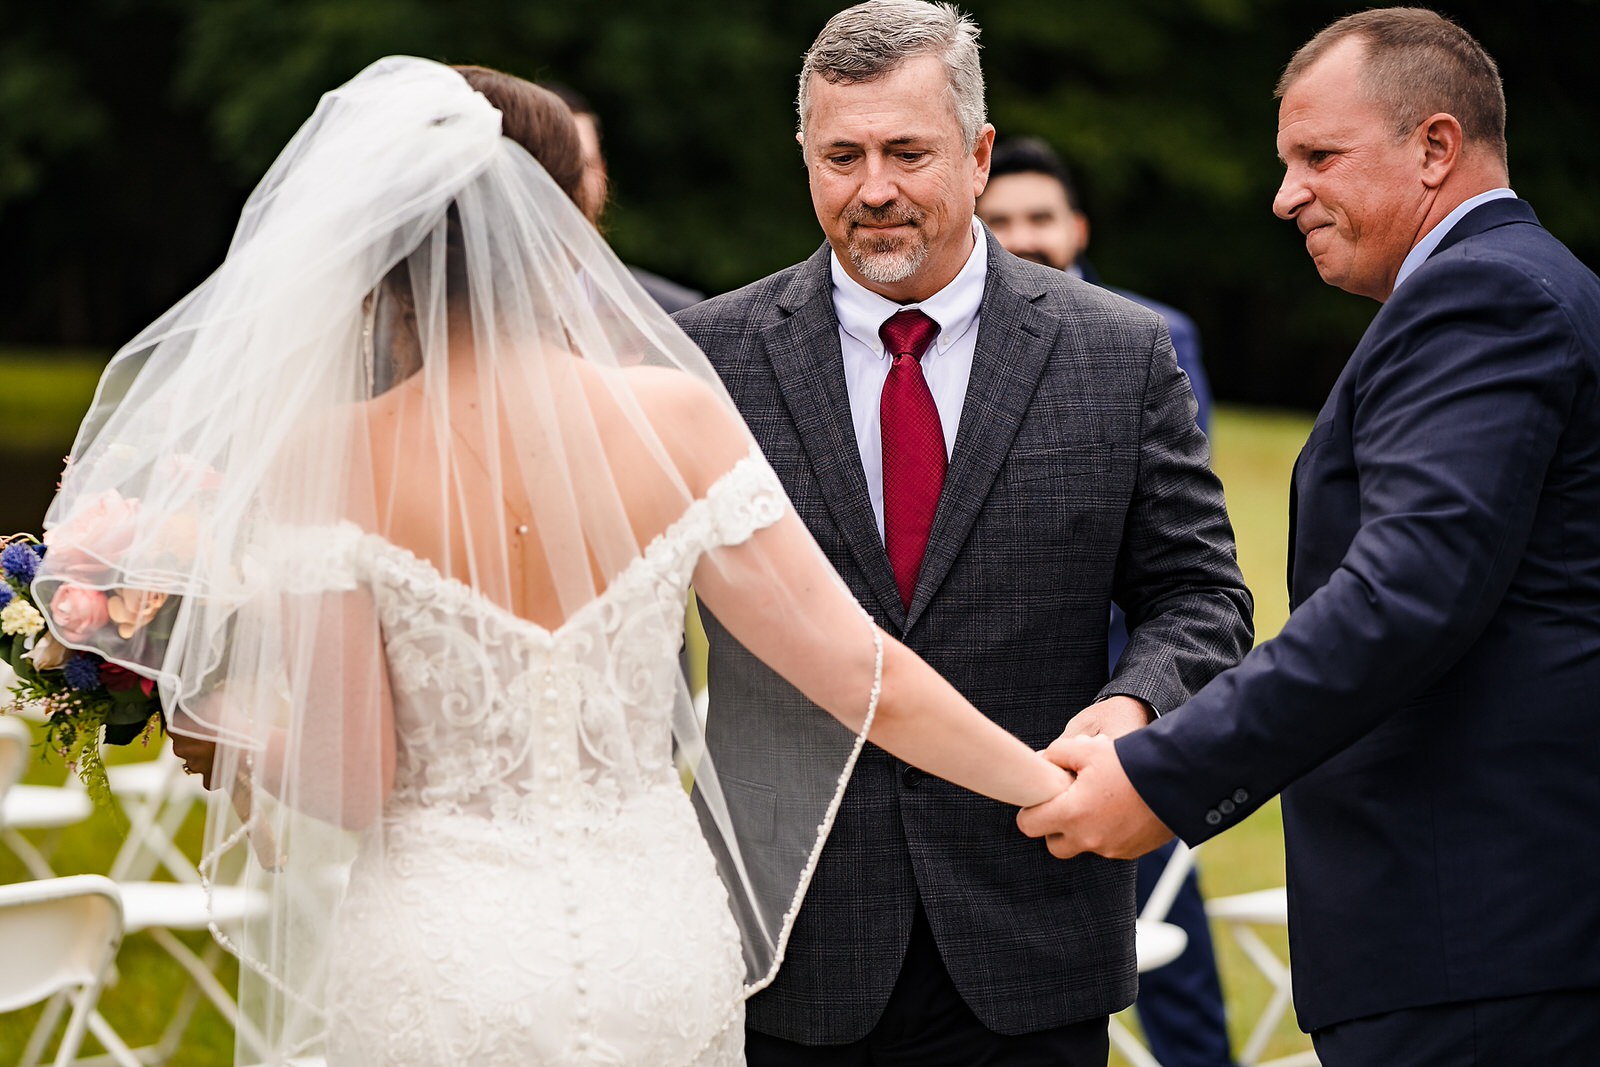 Father of the bride hands her off to her stepfather, so her stepfather can walk her down the second half of the aisle